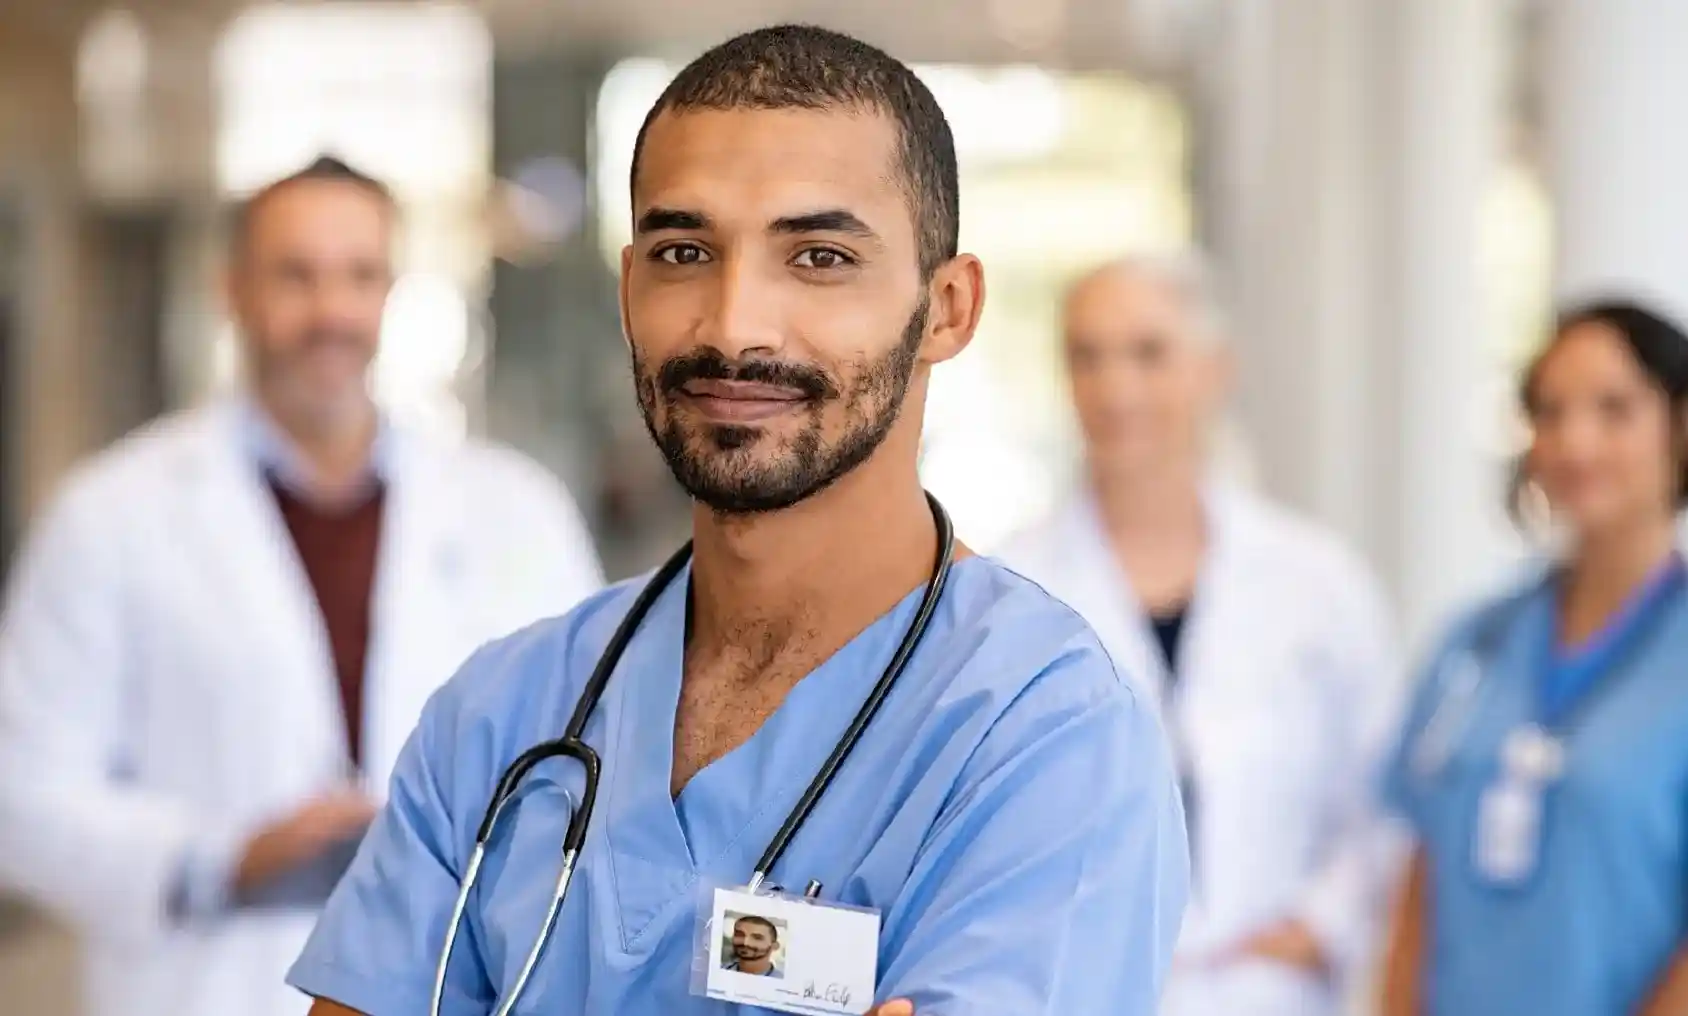 graduate students from study MBBS abroad